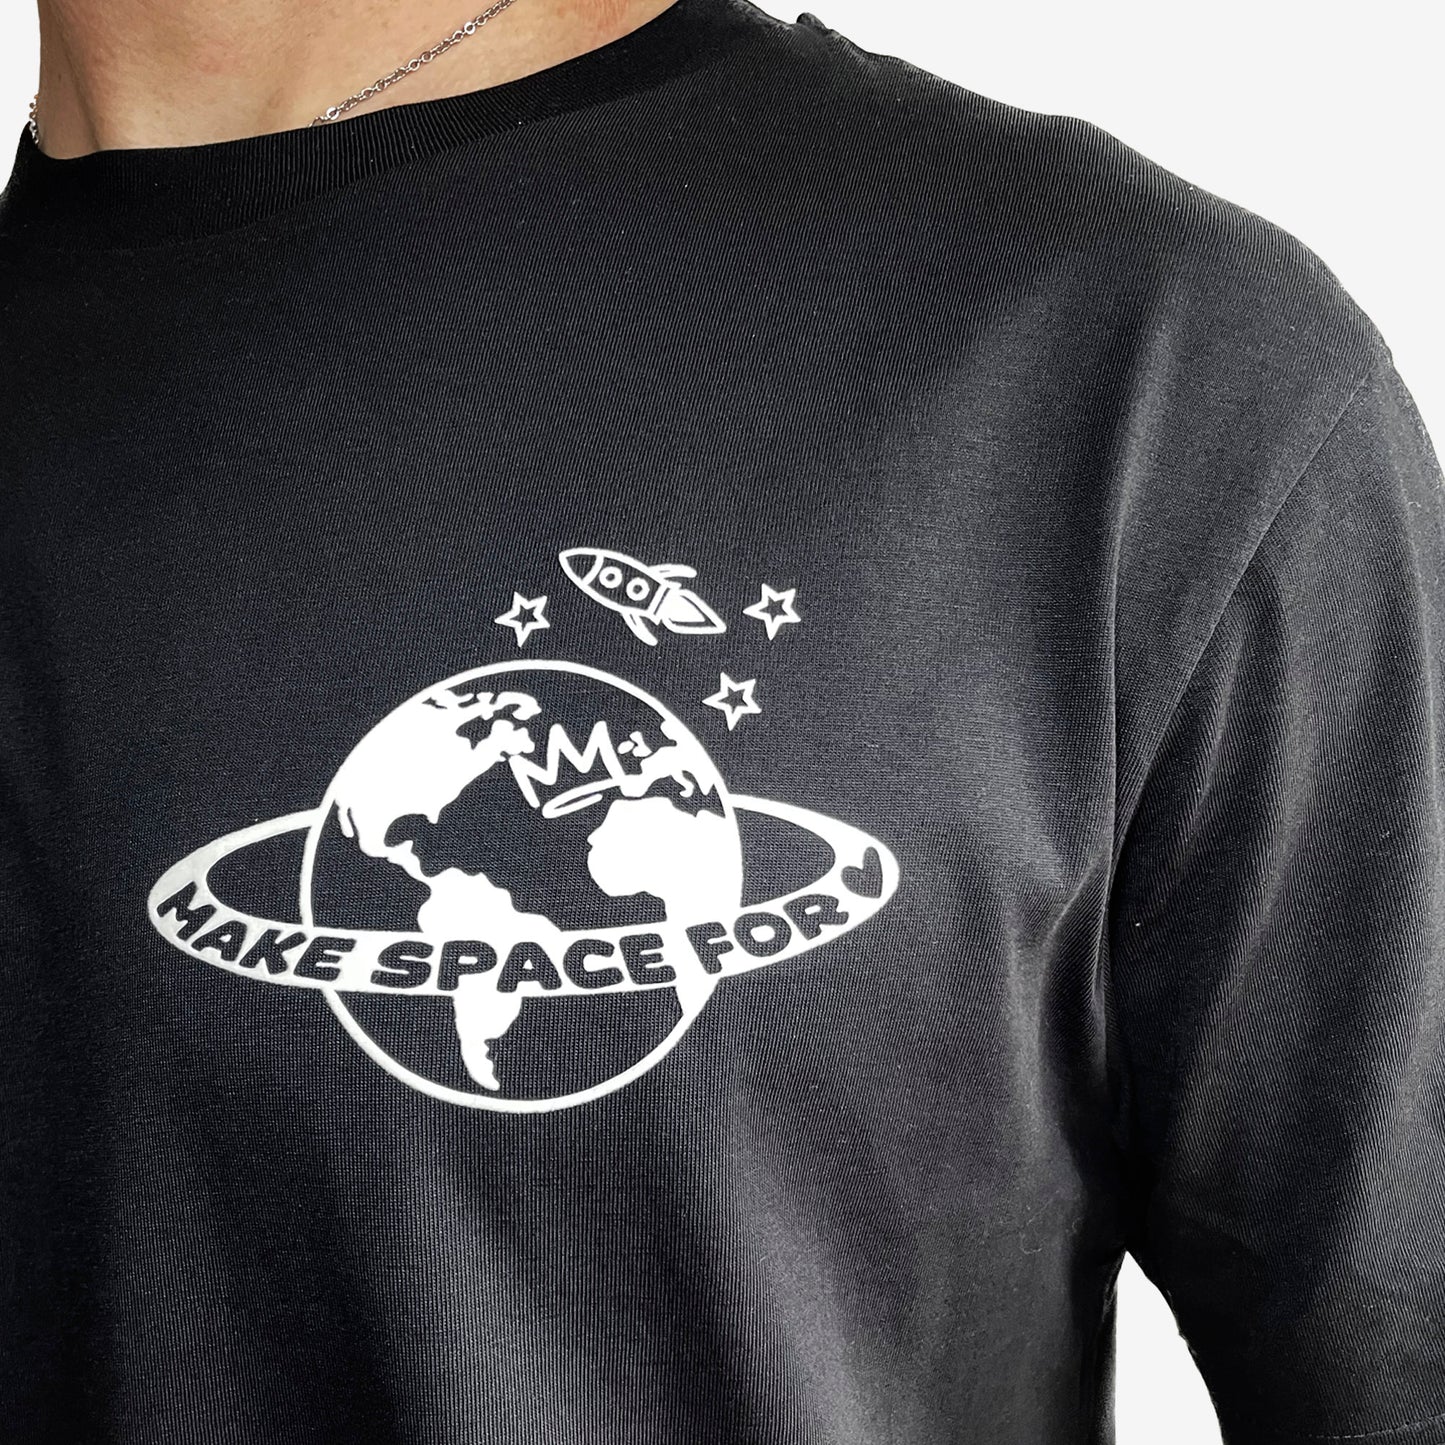 Make Space for Love Relaxed Fit Tee Black